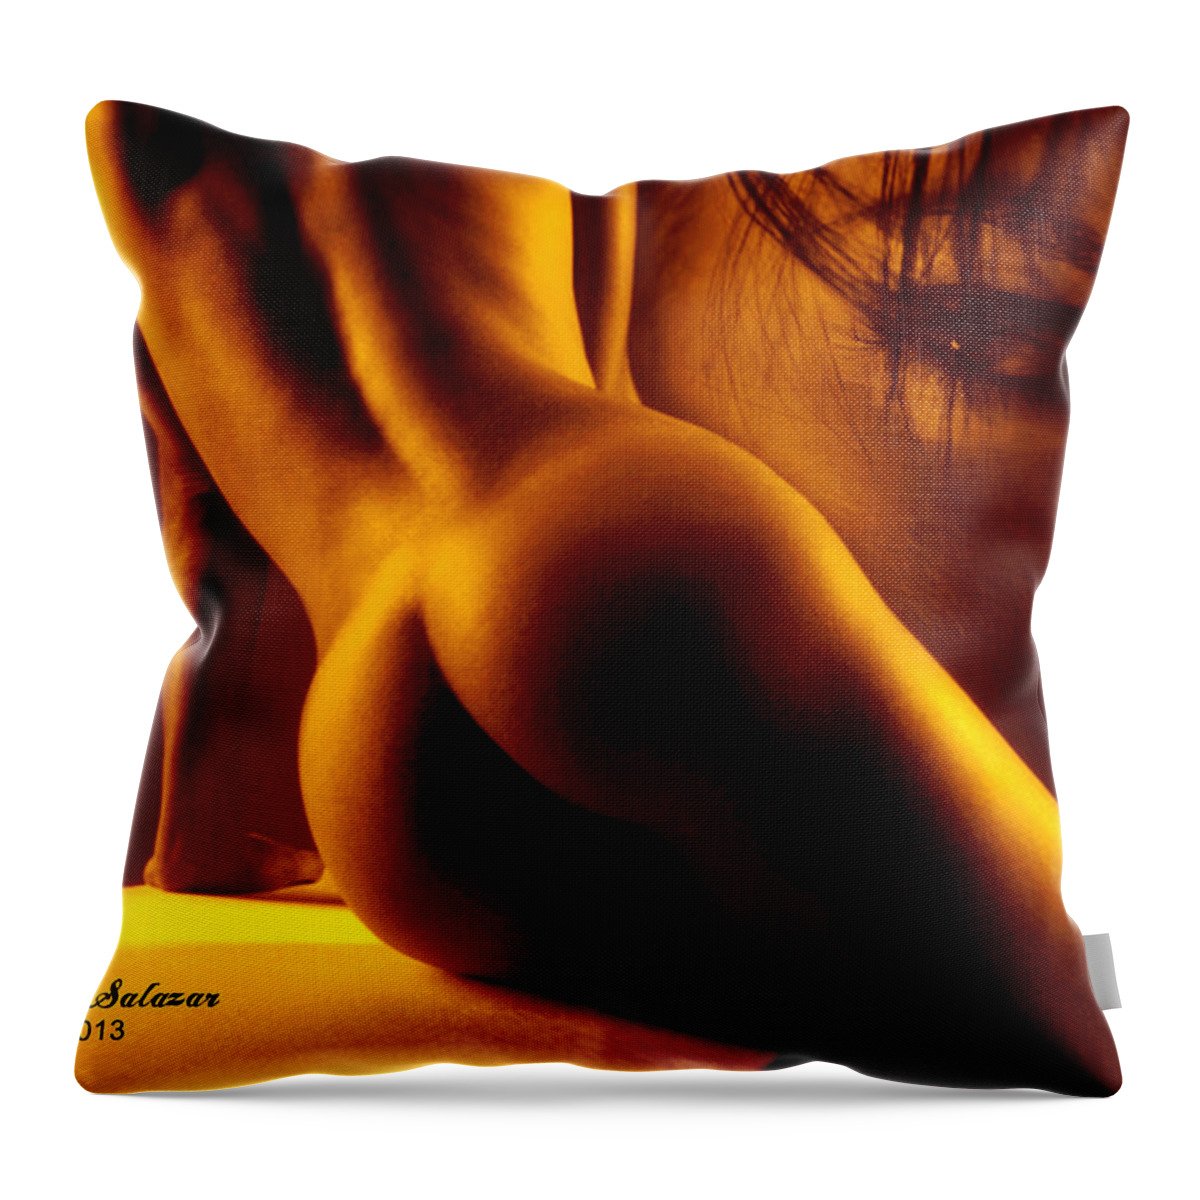 Art Throw Pillow featuring the digital art For your eyes only by Rafael Salazar